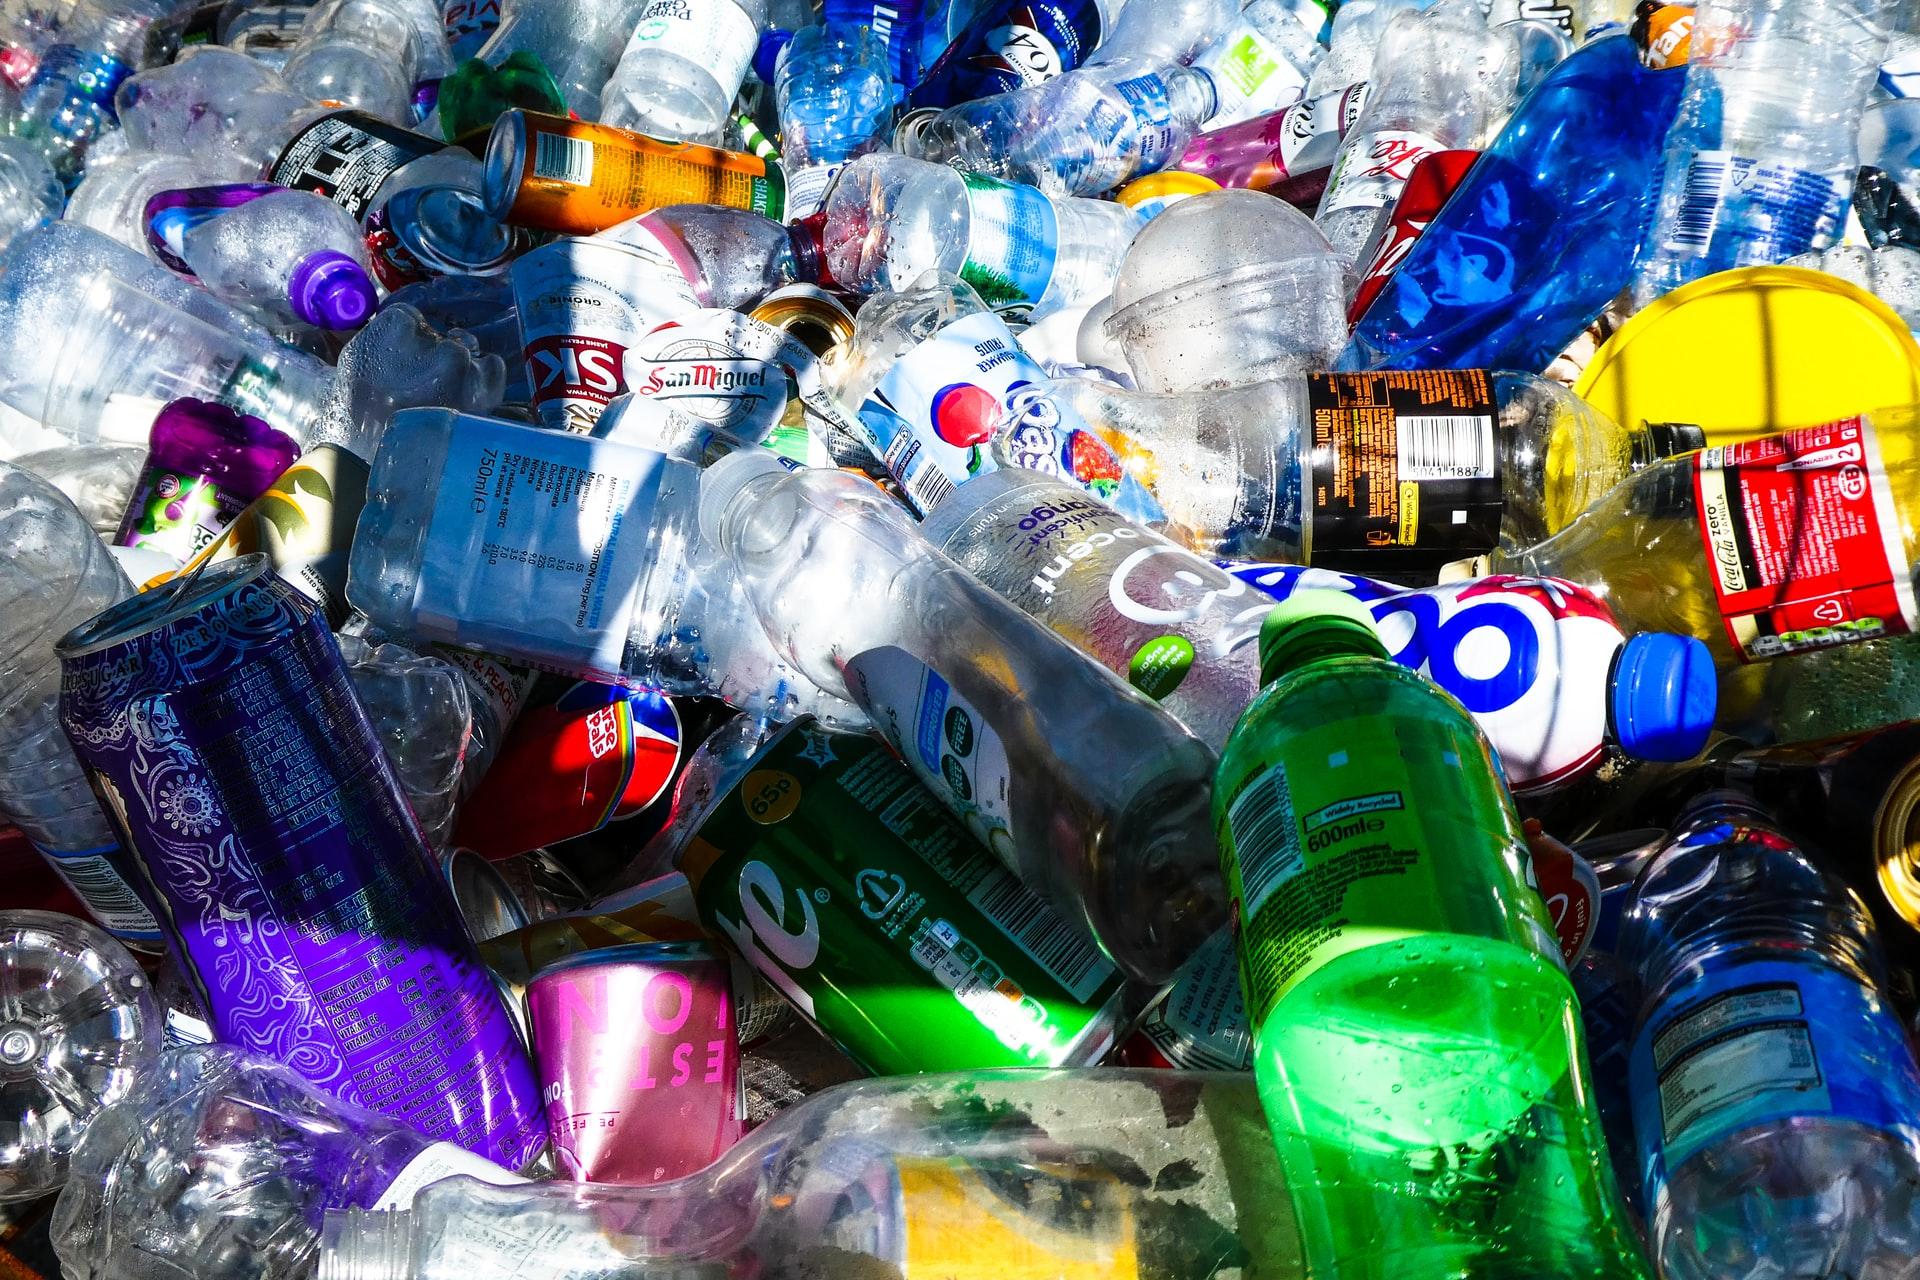 An assortment of color bottles and cans that may end up in a landfill